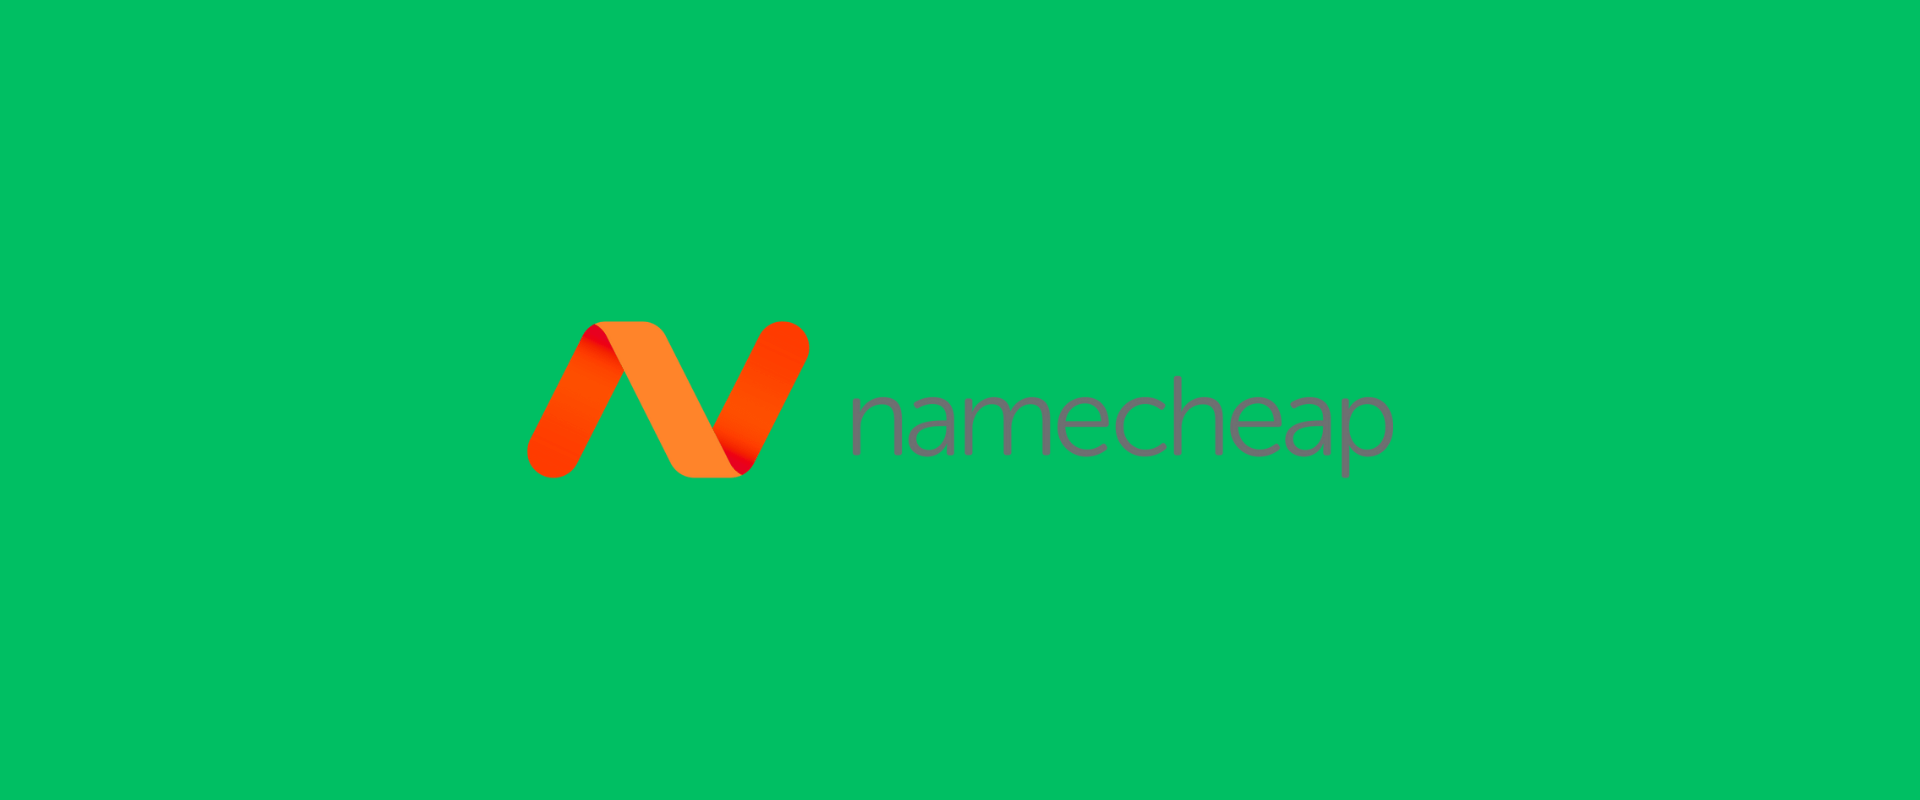 Namecheap Review: Affordable Web Hosting and Domain Registration